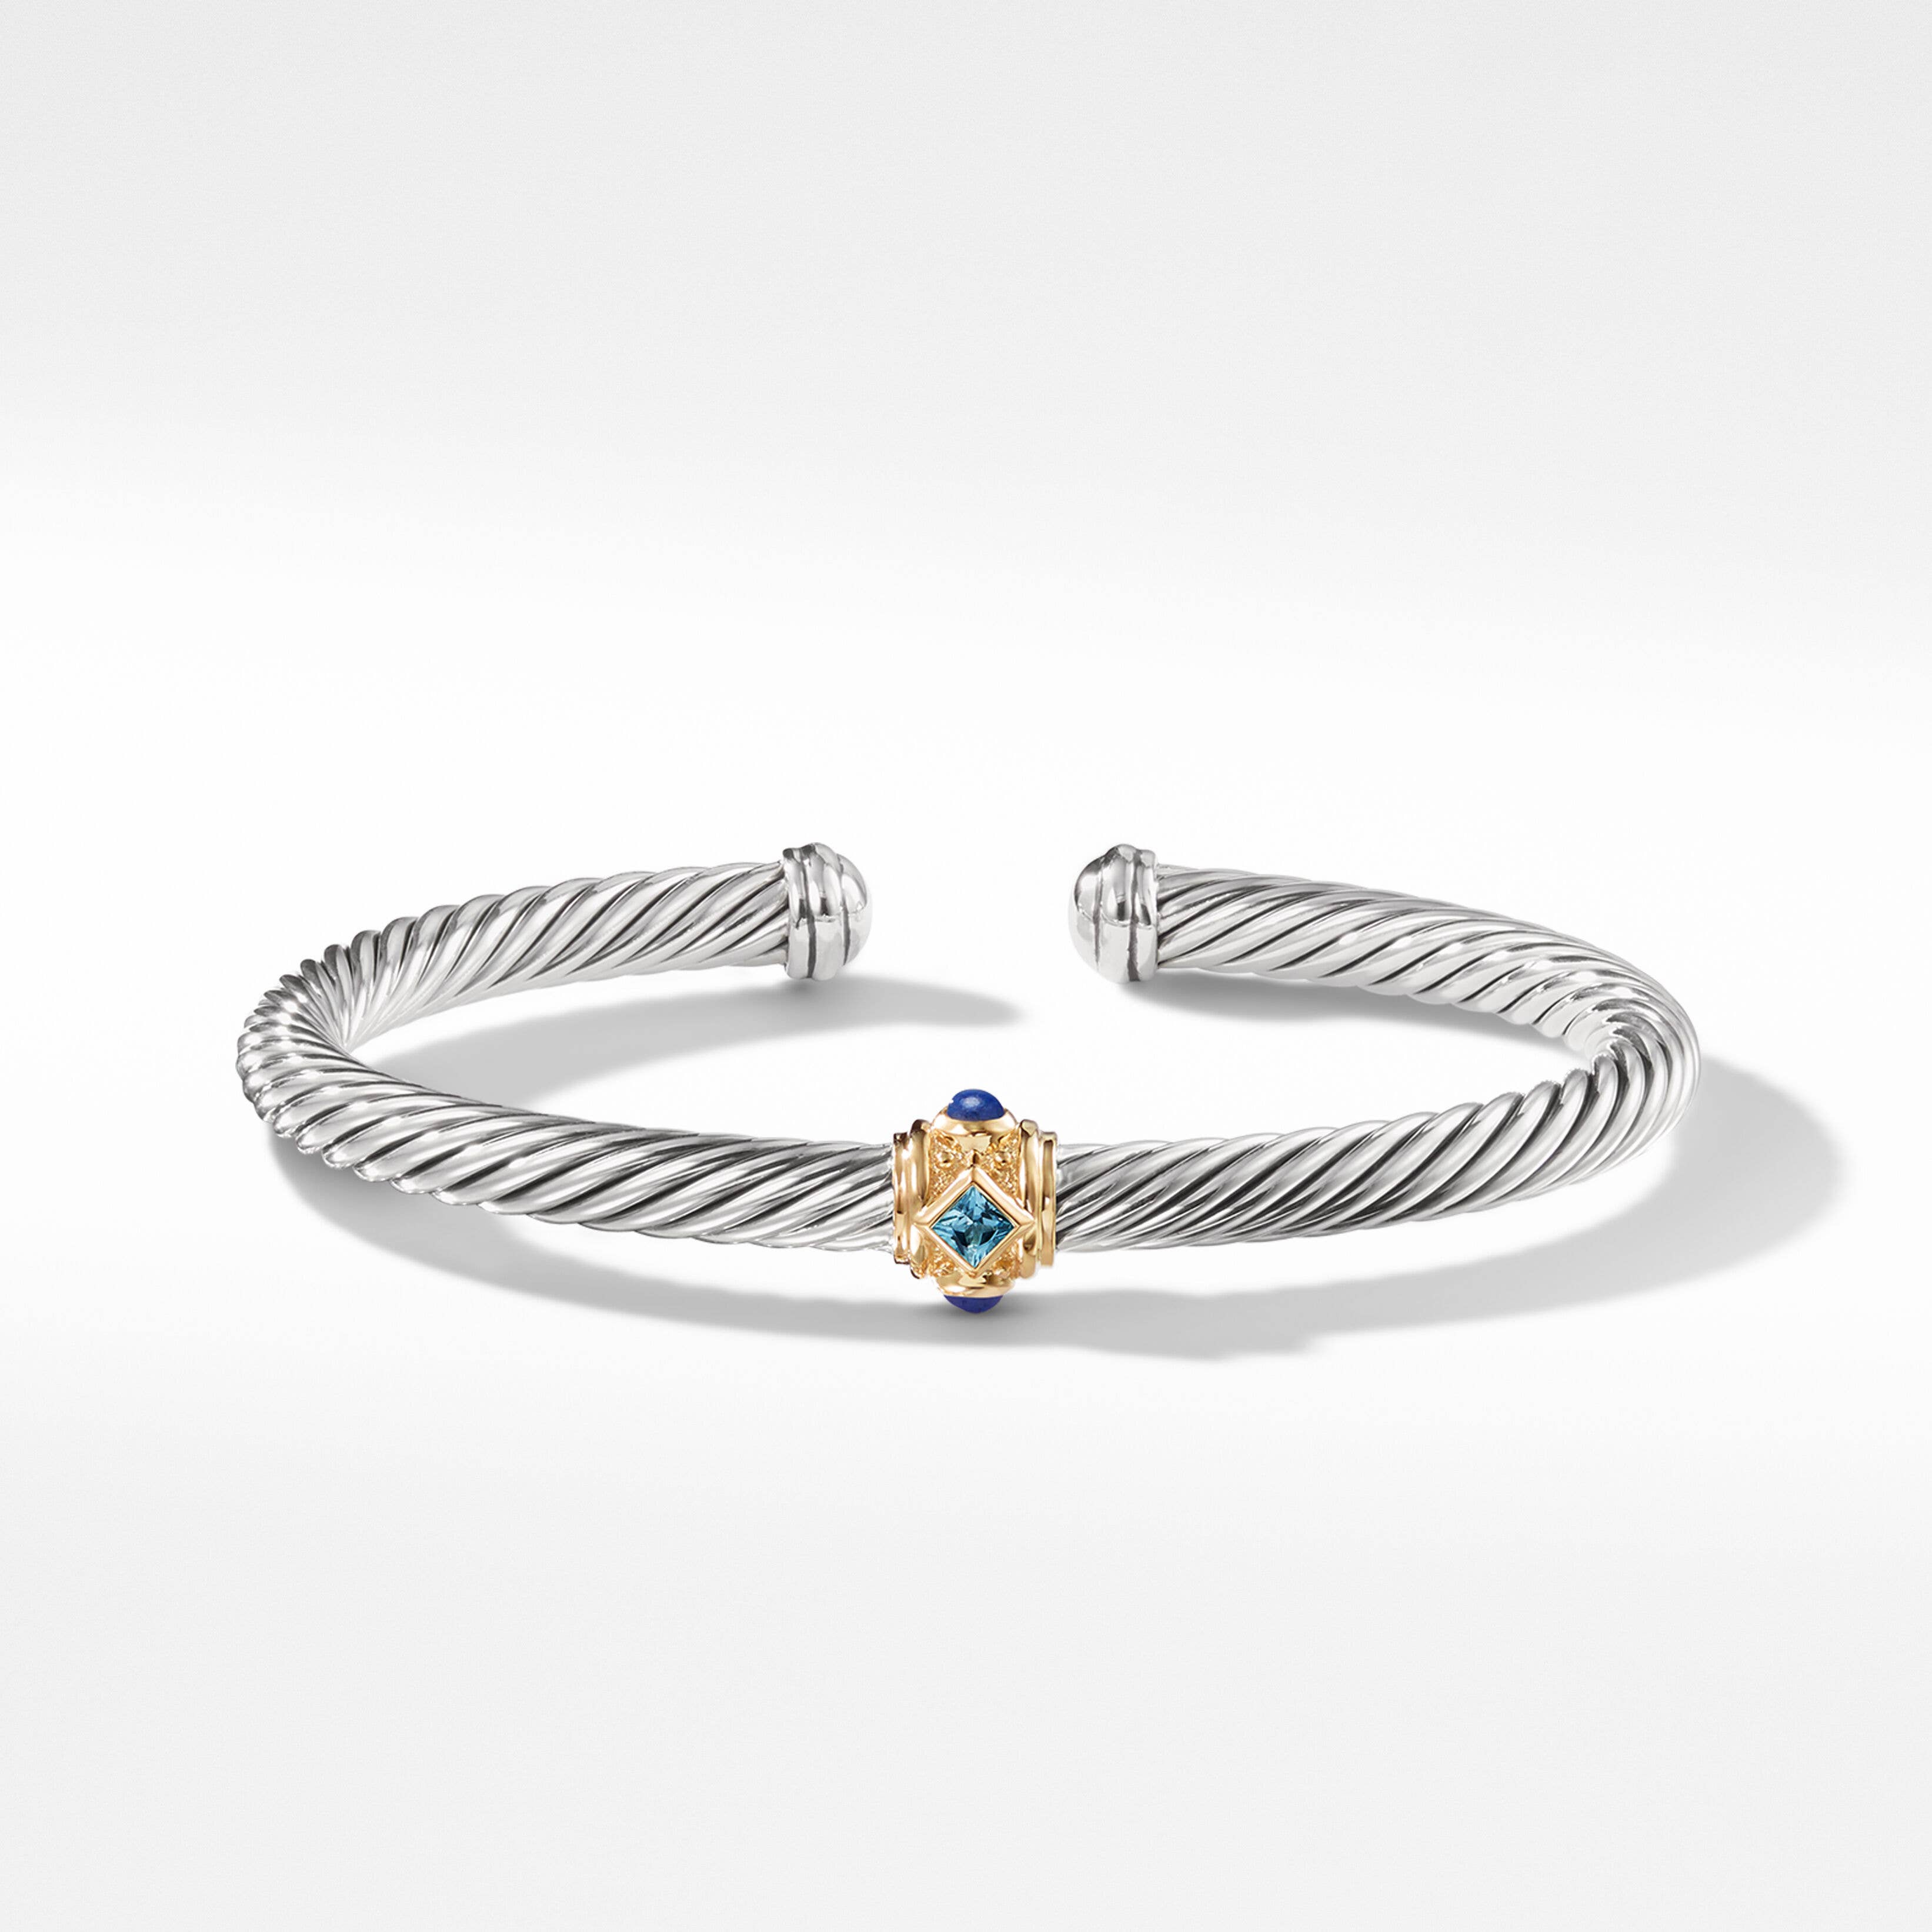 Renaissance Station Bracelet in Sterling Silver with Blue Topaz, Lapis and 14K Yellow Gold